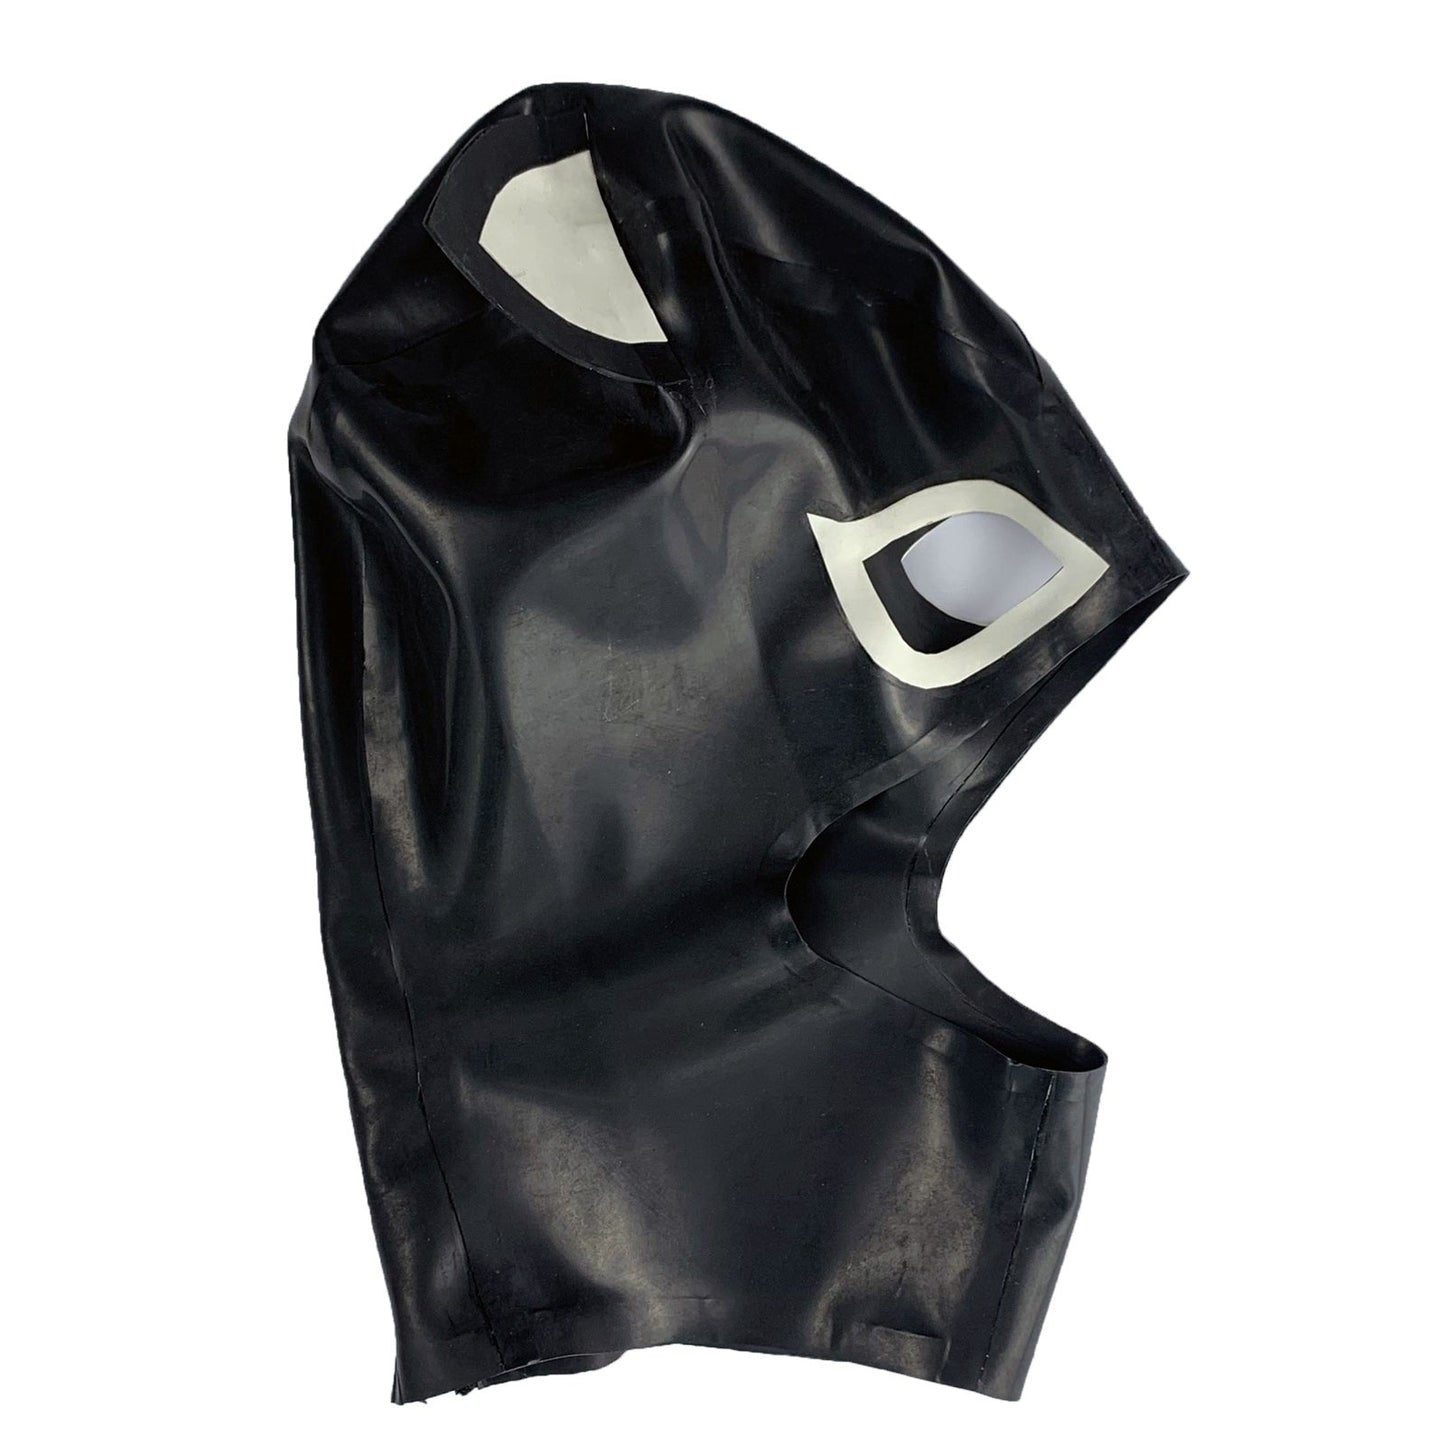 MONNIK Black Latex Hood Rubber Mask with Cat Small Ear for Wear Latex Party Bodysuit Cosplay